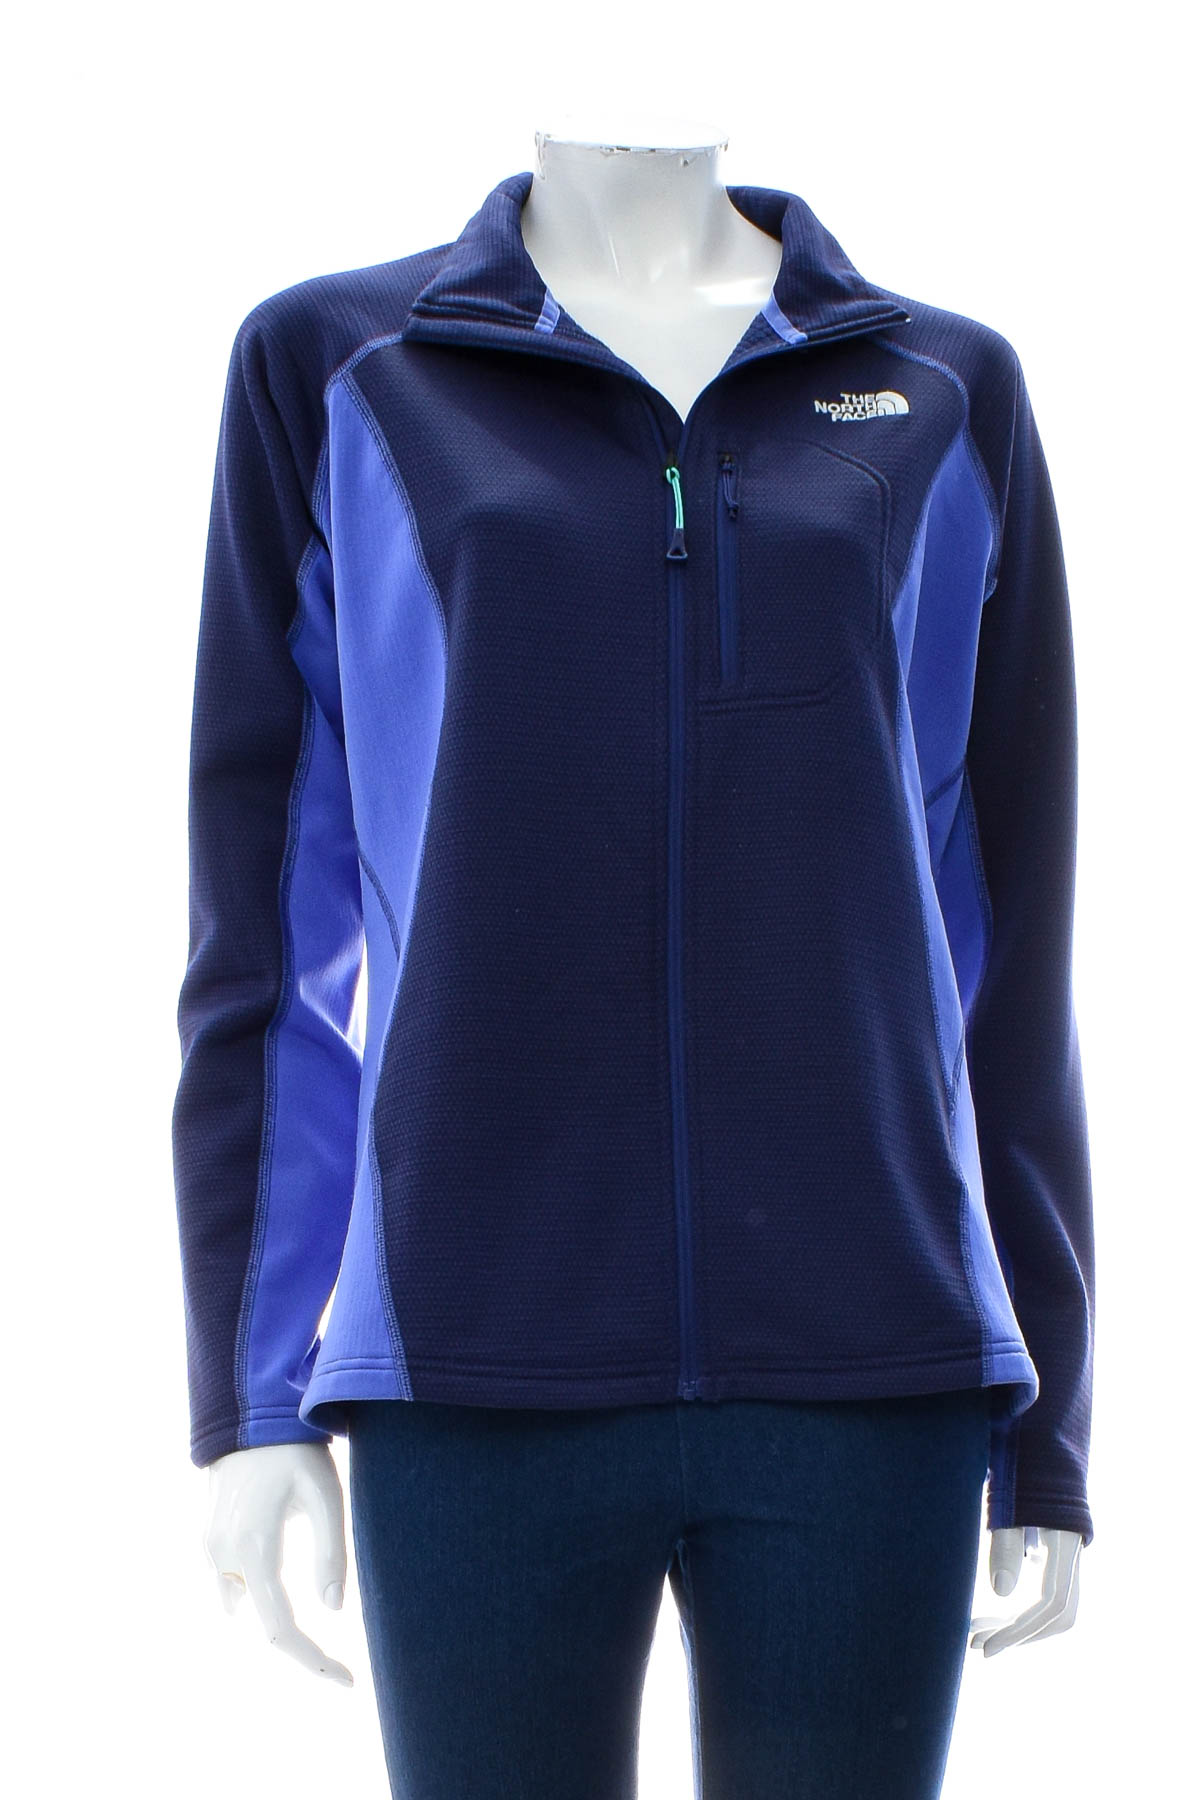 Female sports top - The North Face - 0